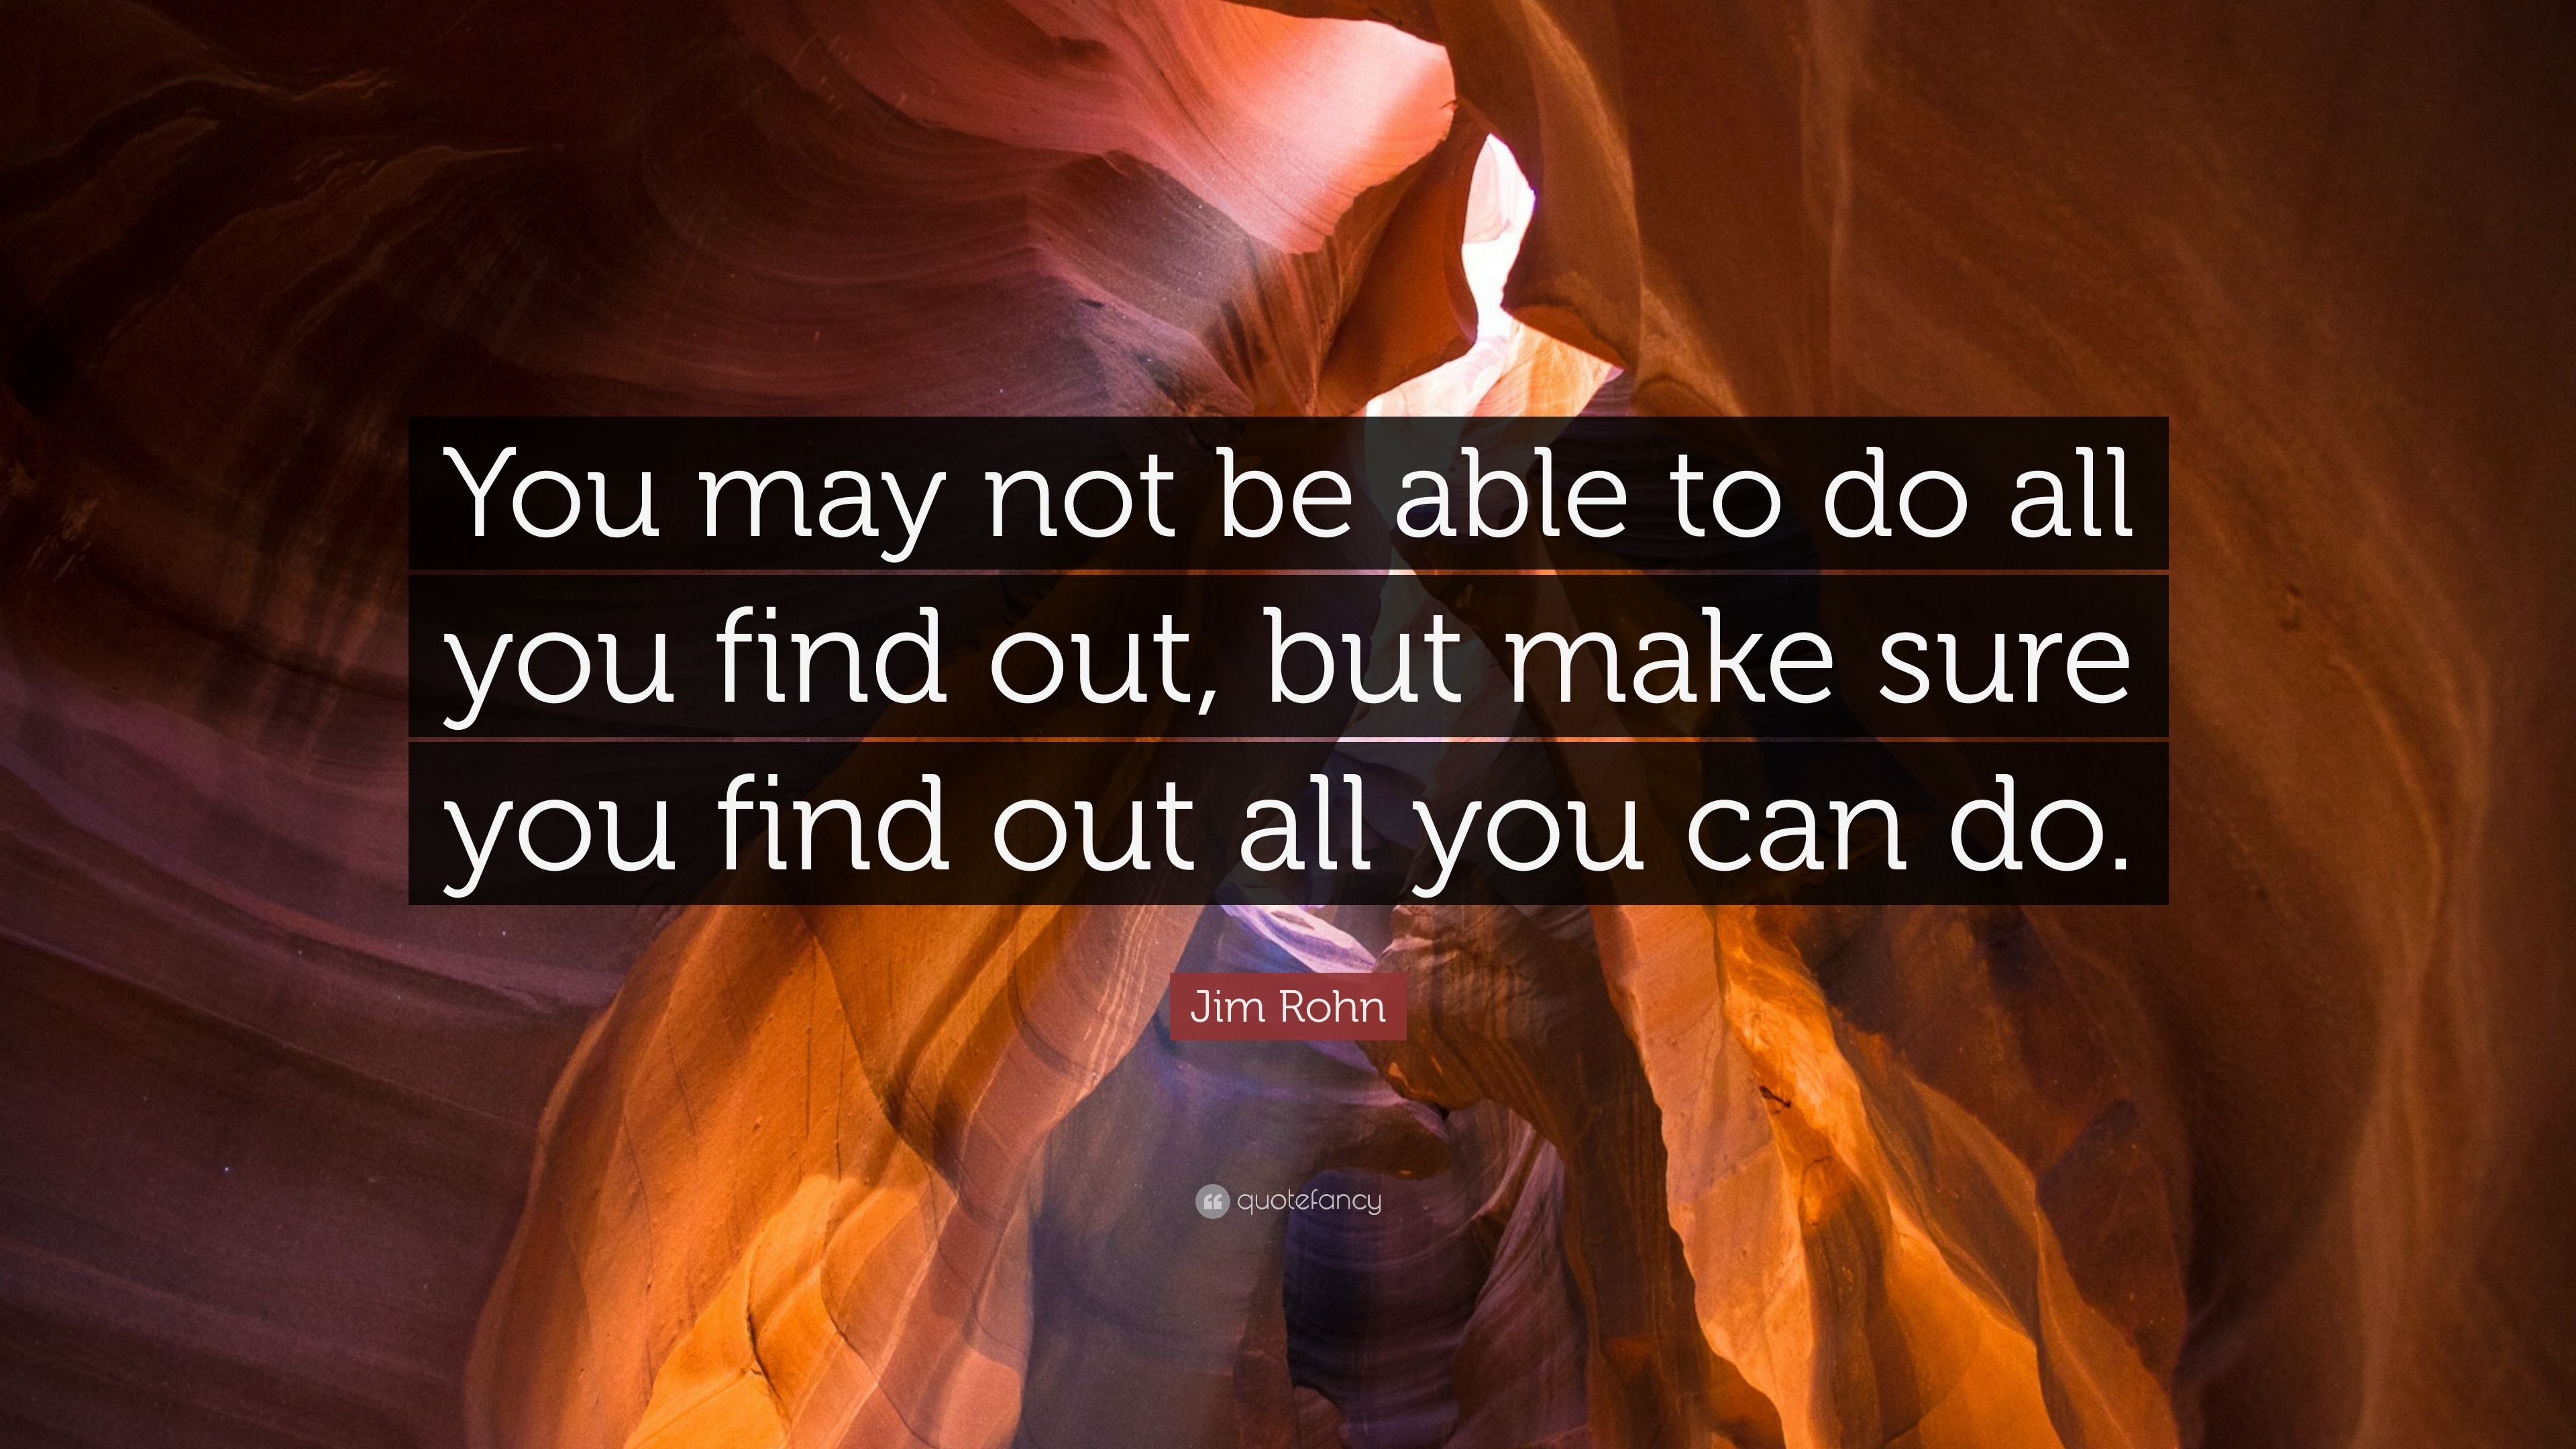 Jim Rohn Quote “you May Not Be Able To Do All You Find Out But Make